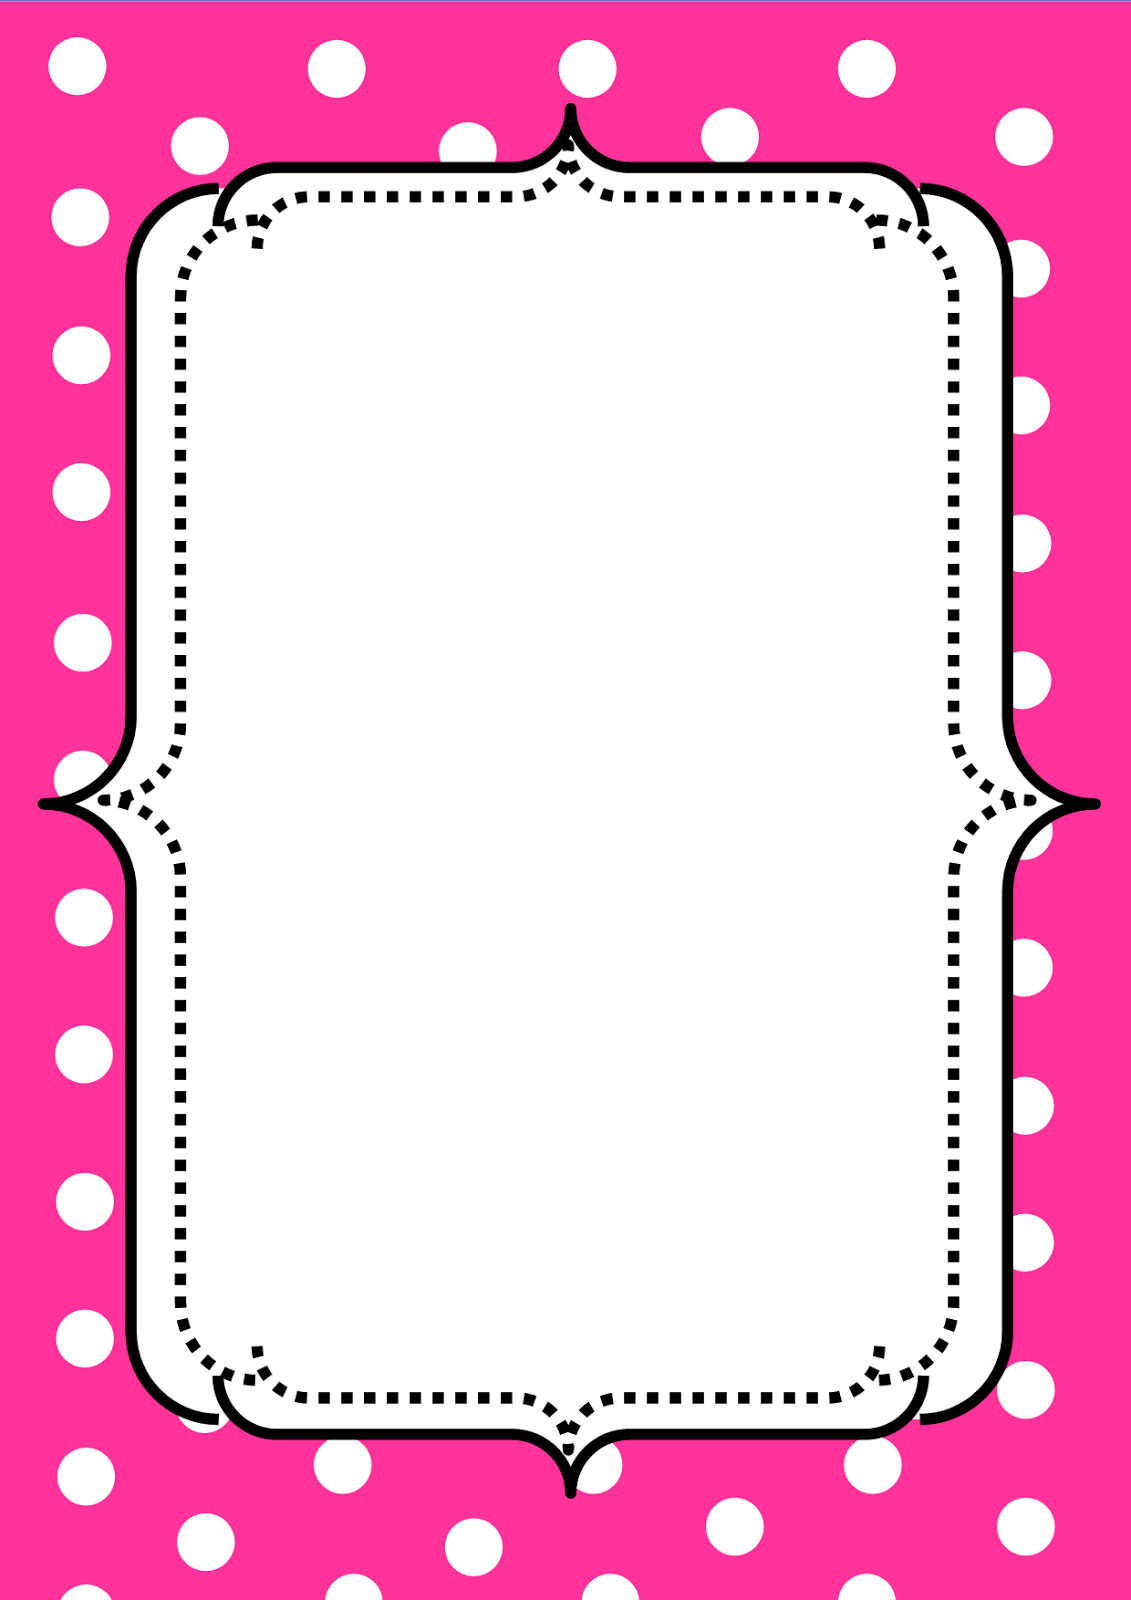 free baby clipart borders frames - photo #45